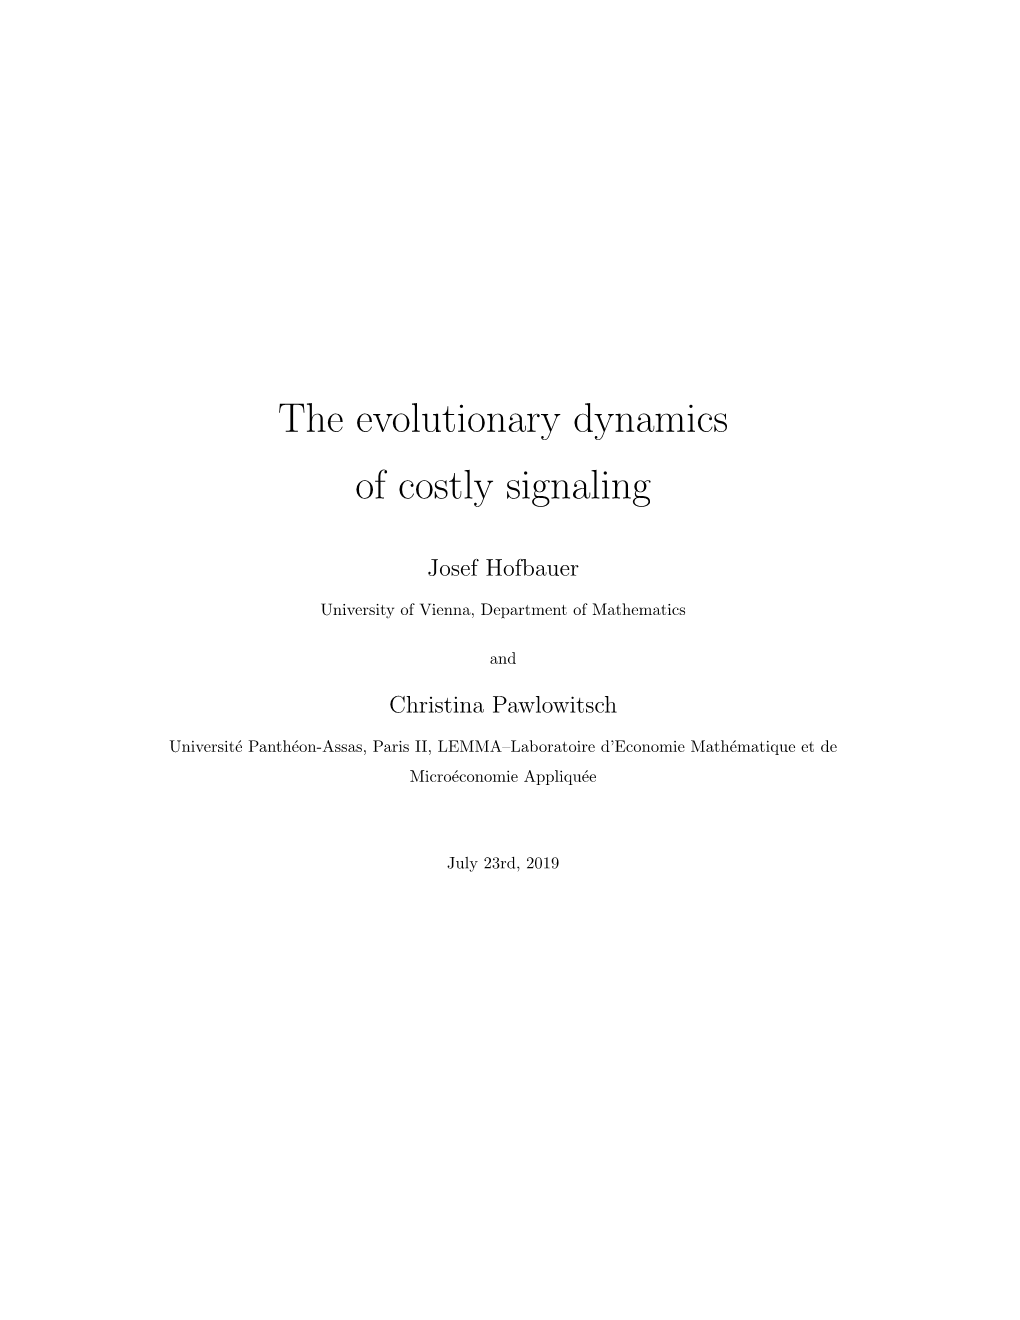 The Evolutionary Dynamics of Costly Signaling